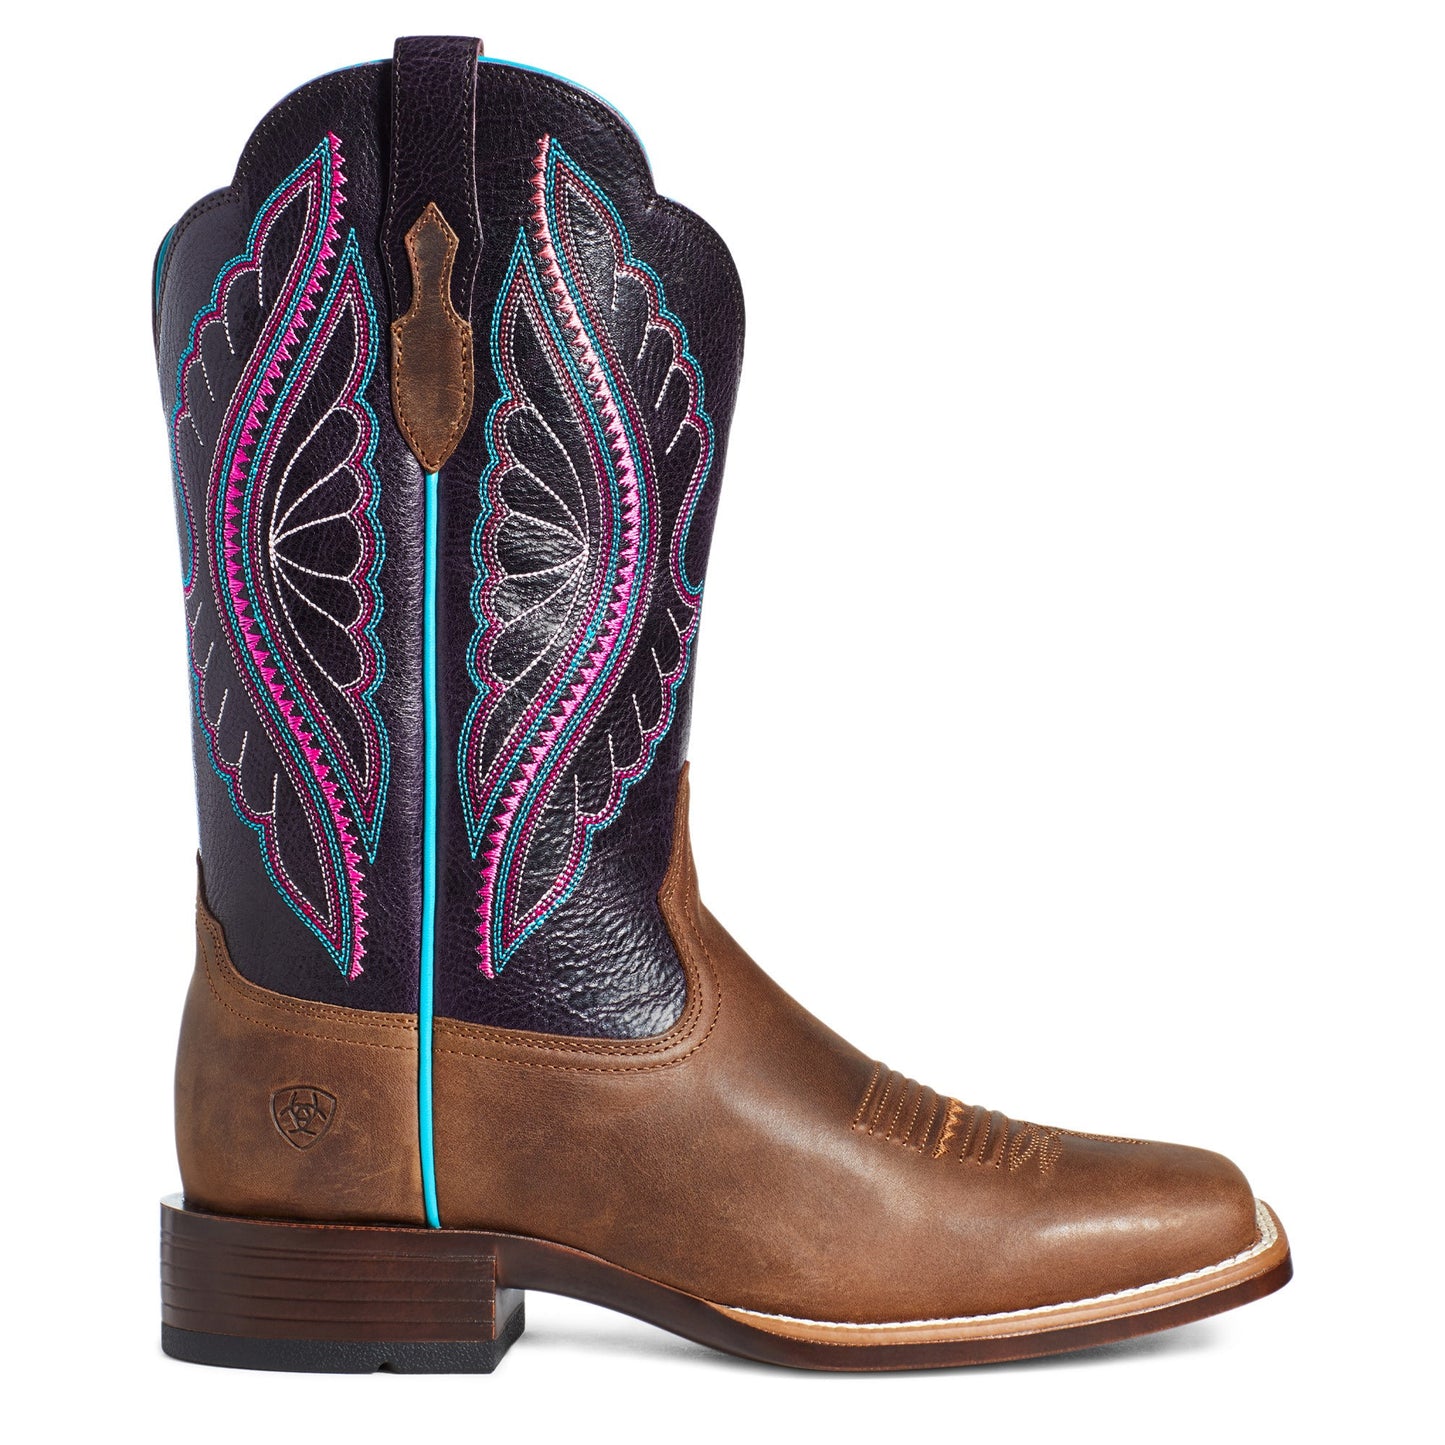 Ariat Ladies Primetime Embroidered Brown & Purple Western Boots 10035936